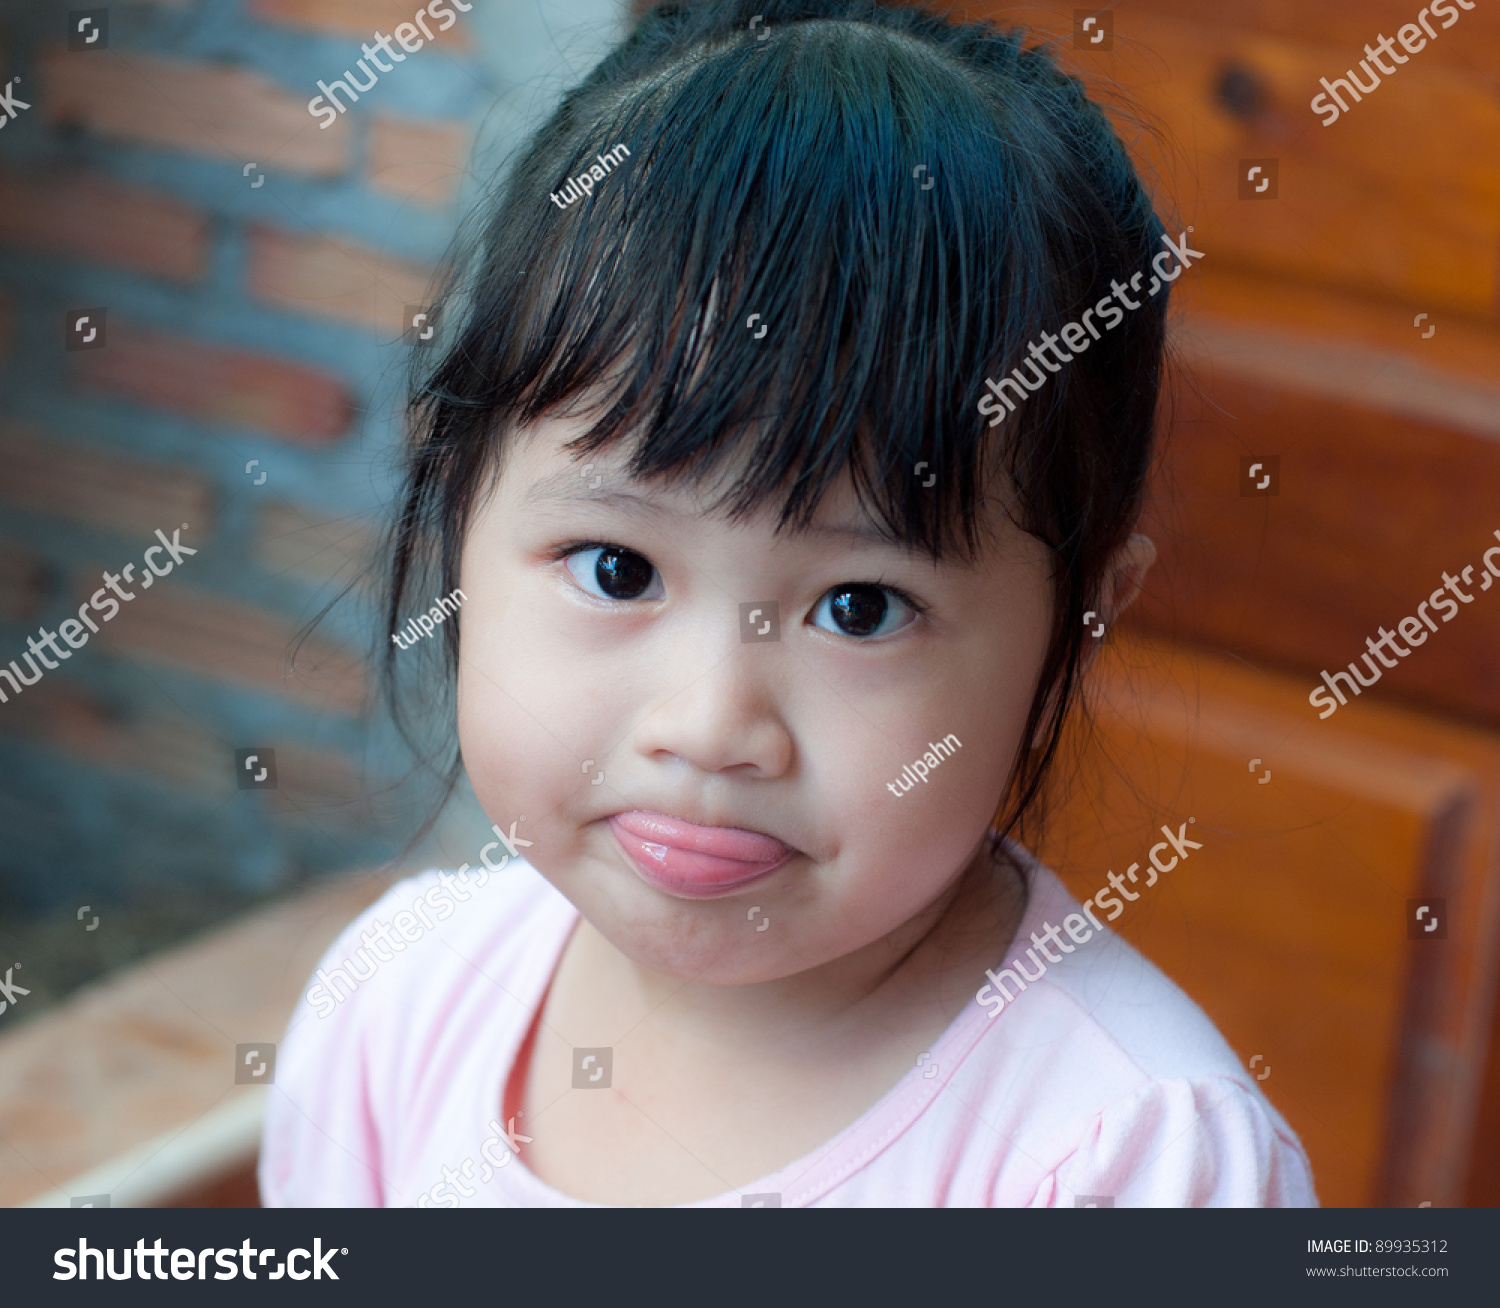 Little Asian Girl Sticking Tongue Out Stock Photo 89935312 | Shutterstock